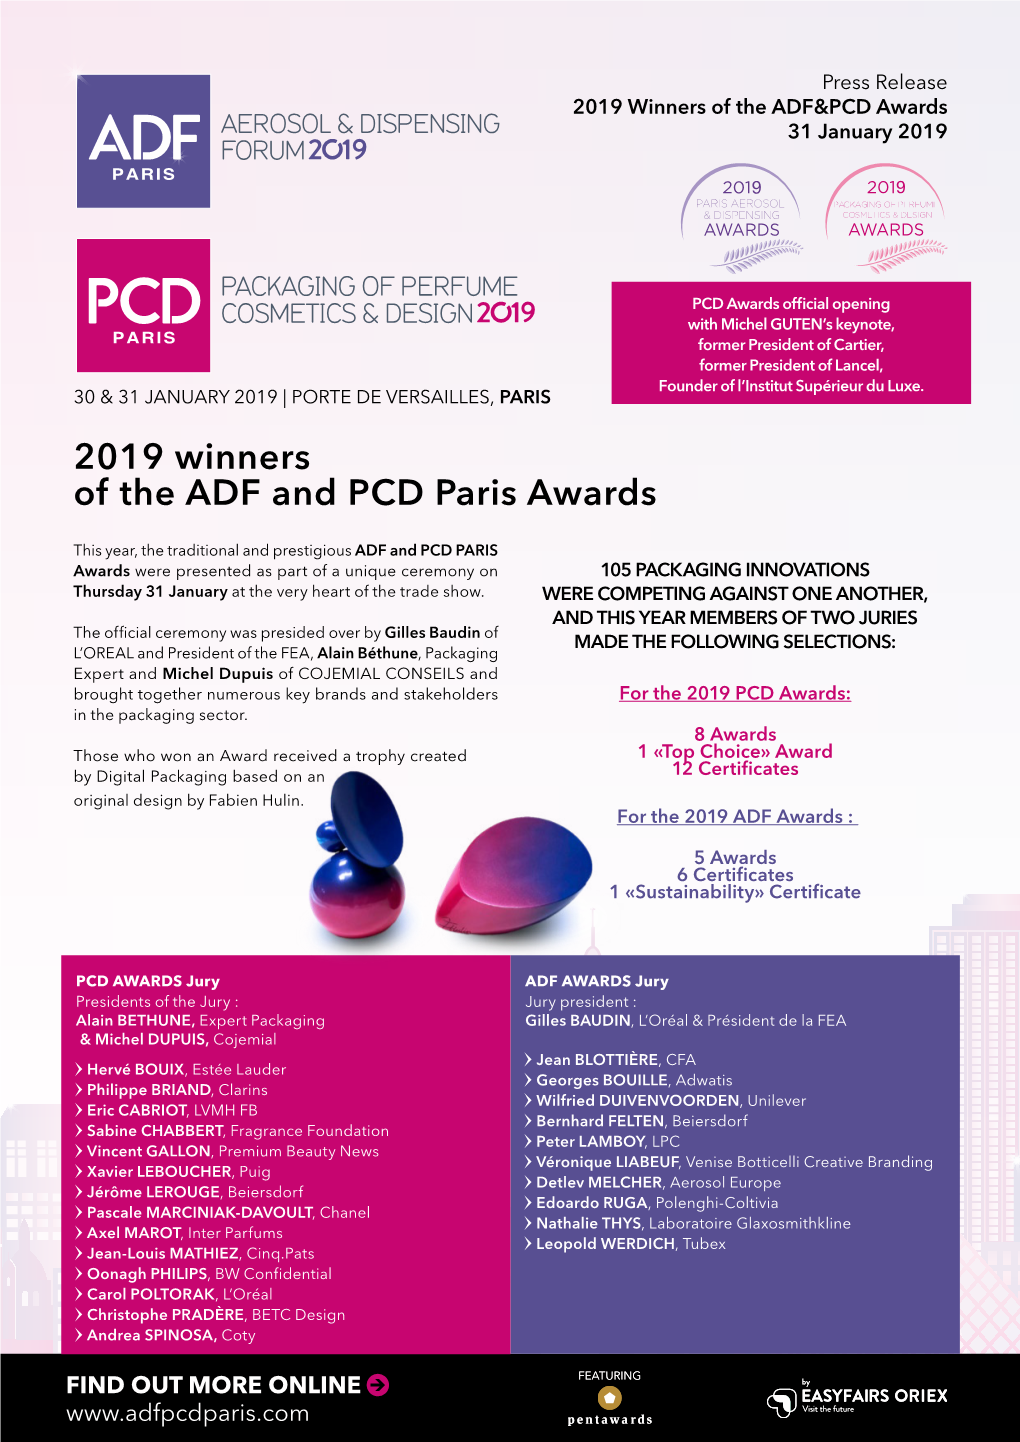 2019 Winners of the ADF and PCD Paris Awards